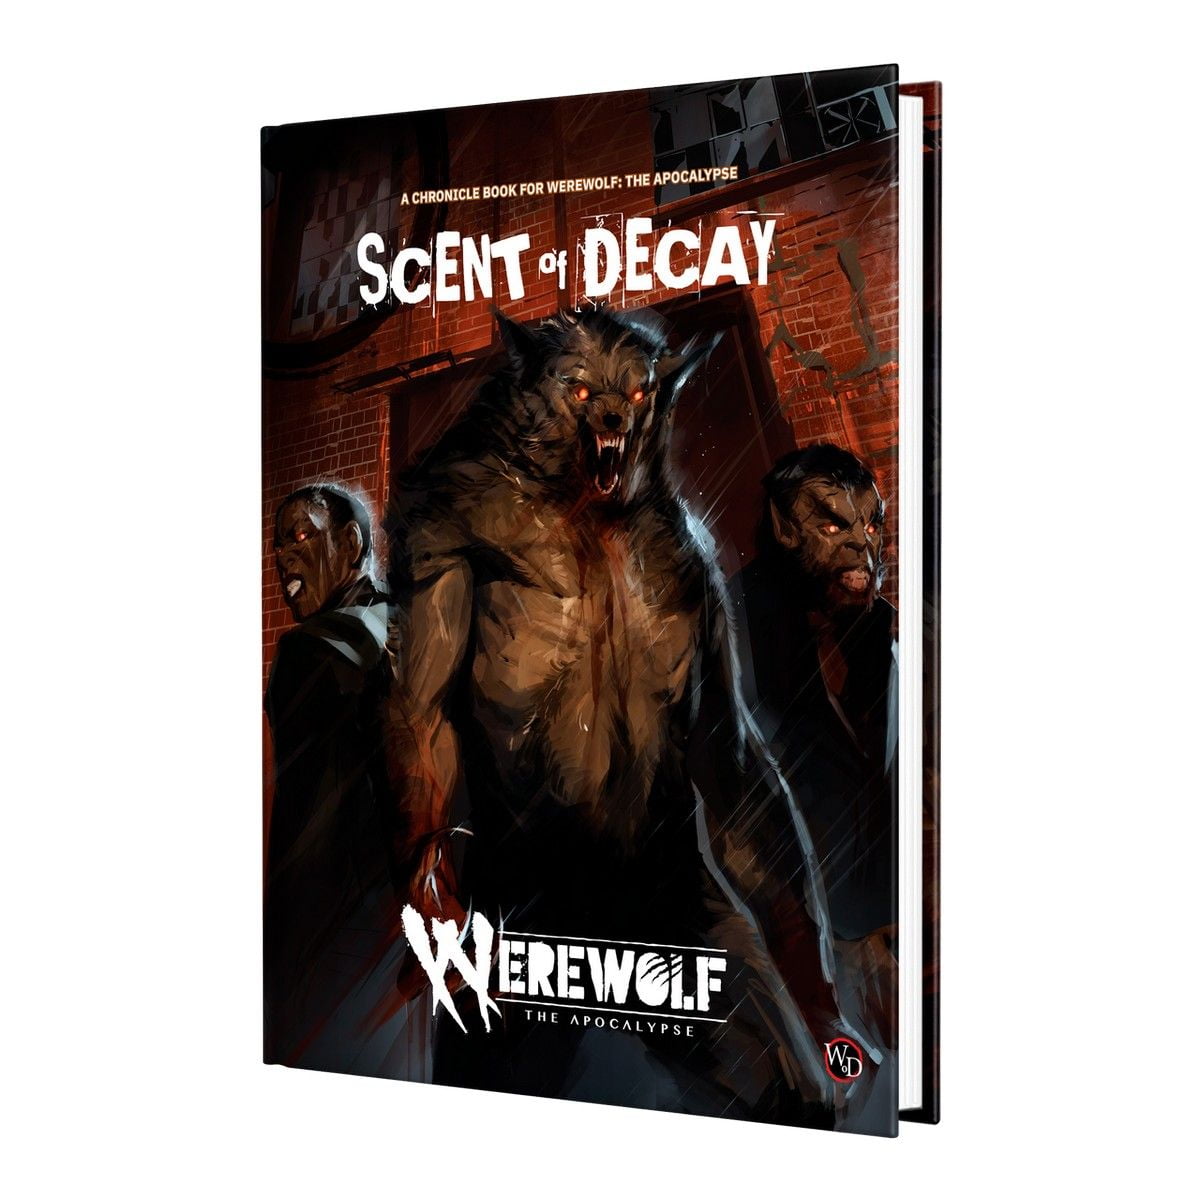 Werewolf: The Apocalypse 5th Edition - Scent of Decay Chronicle